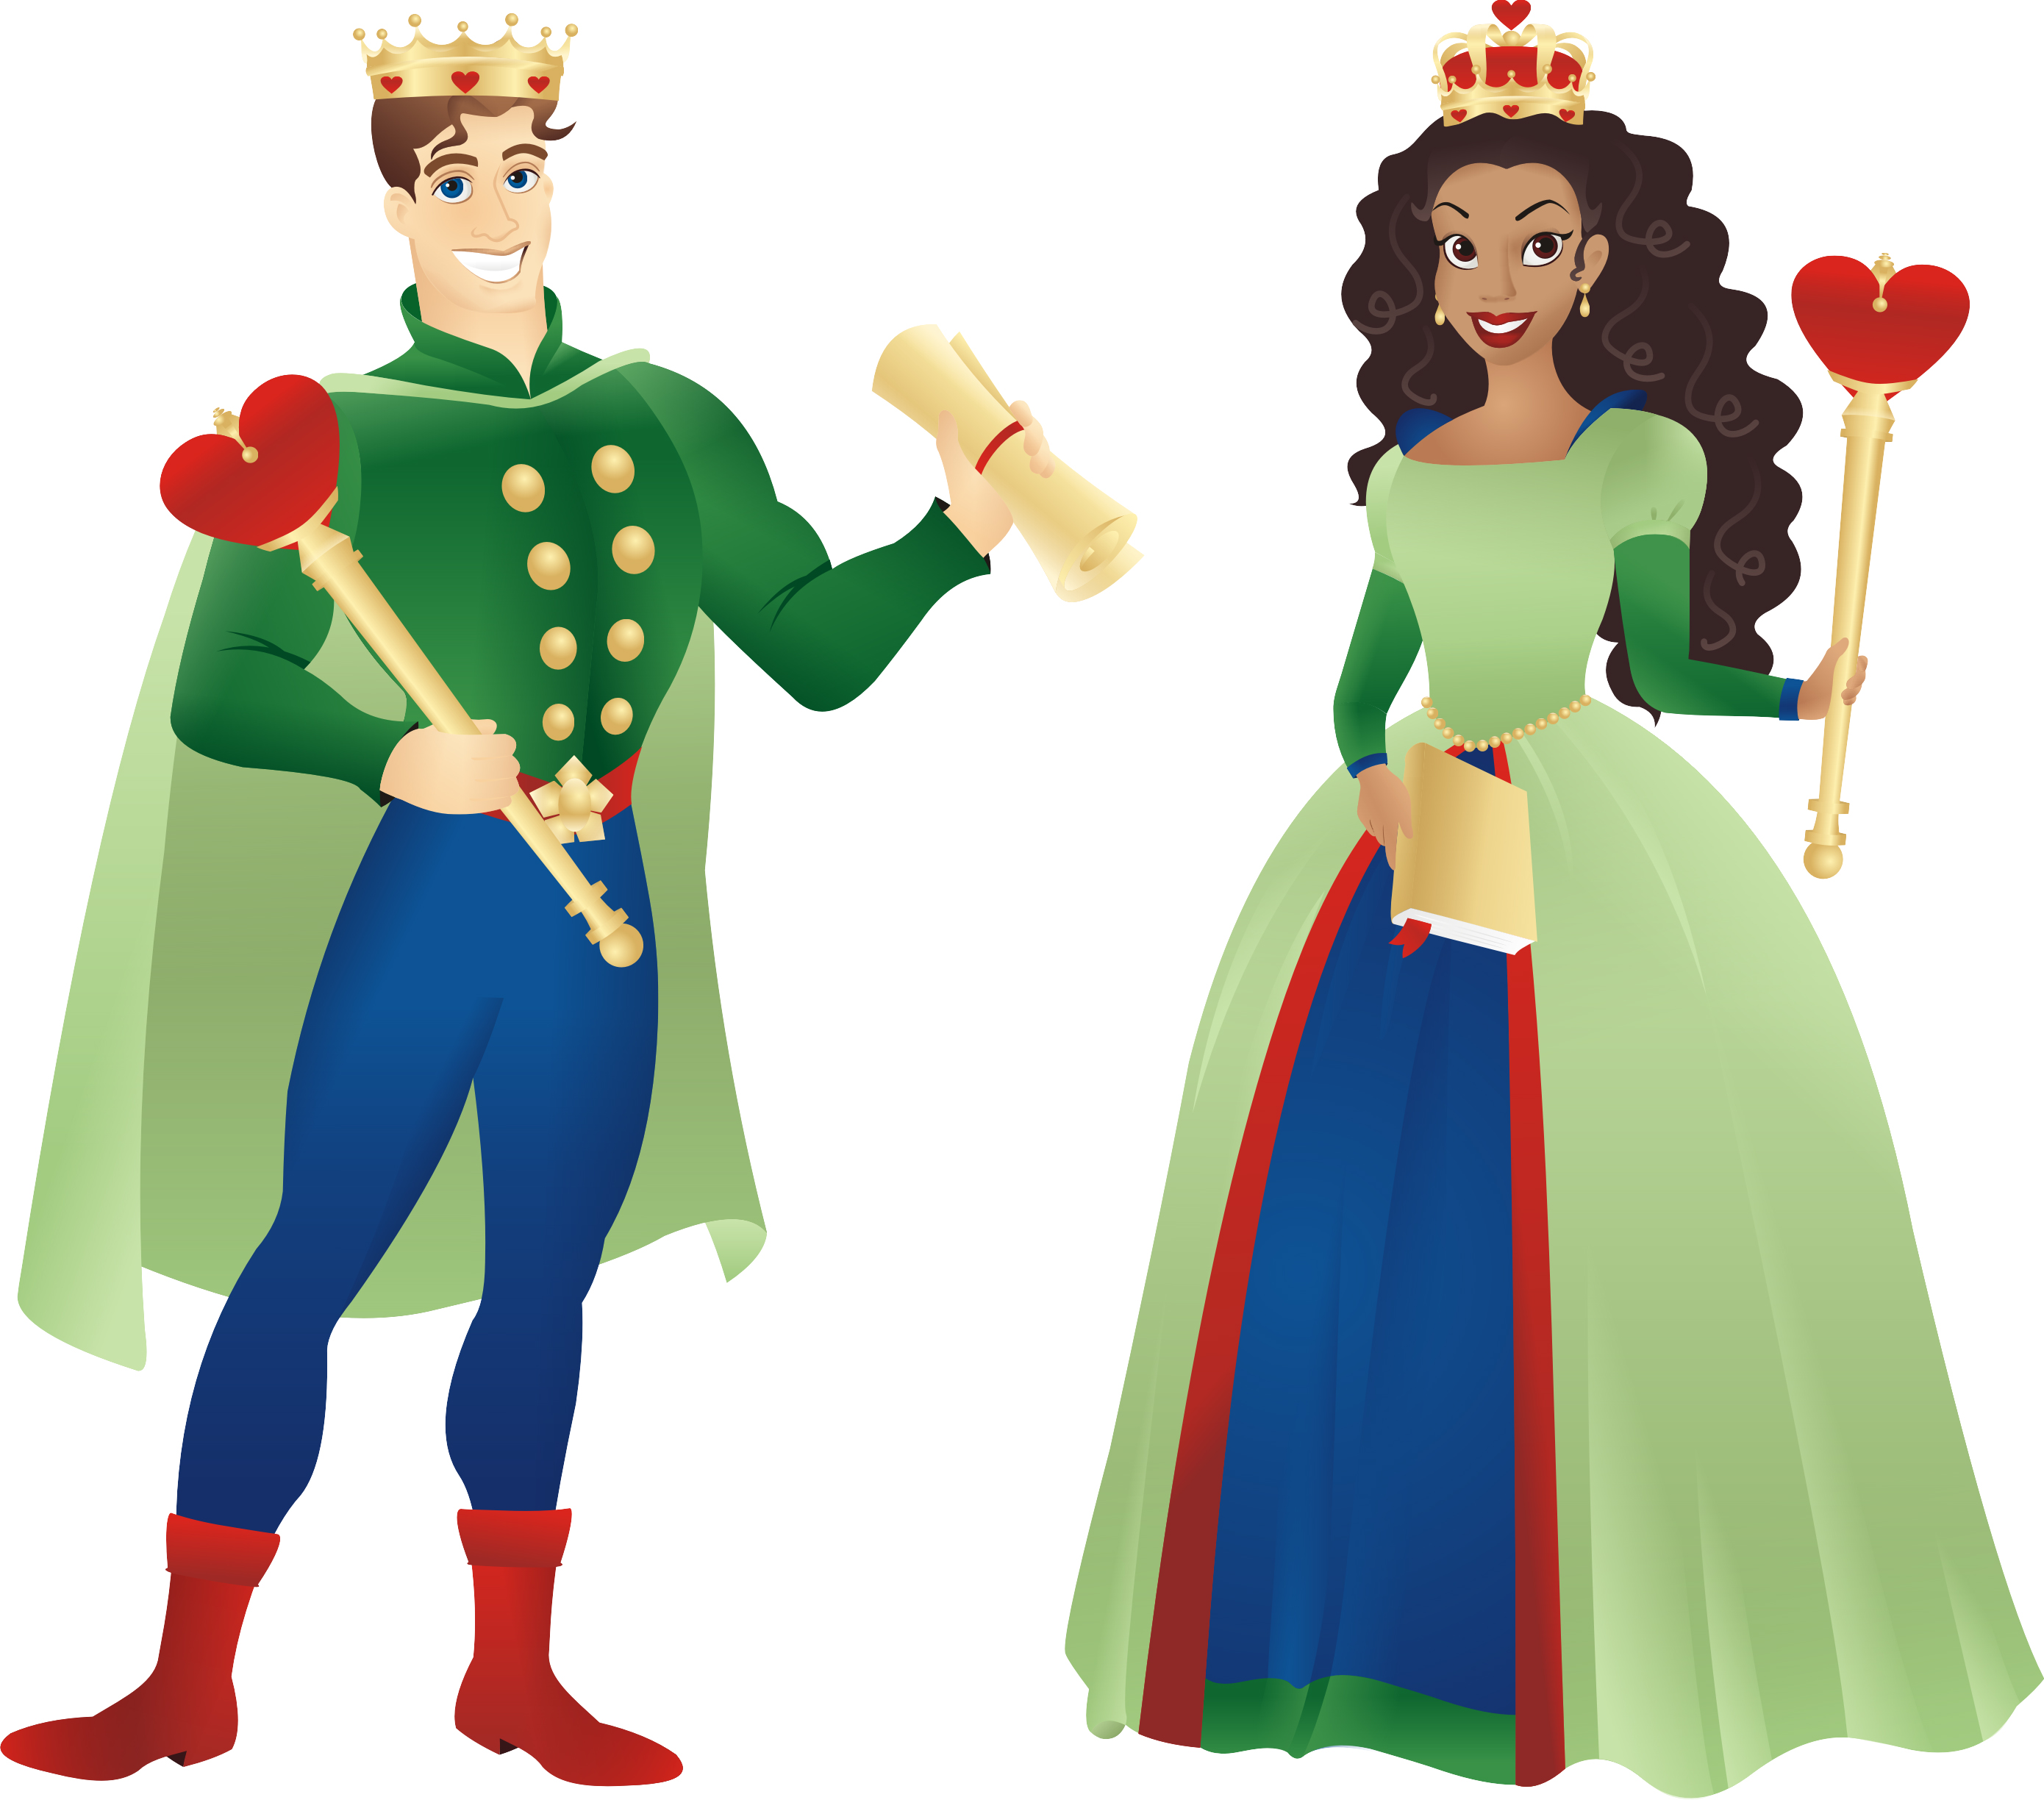 prom king and queen clipart - photo #37